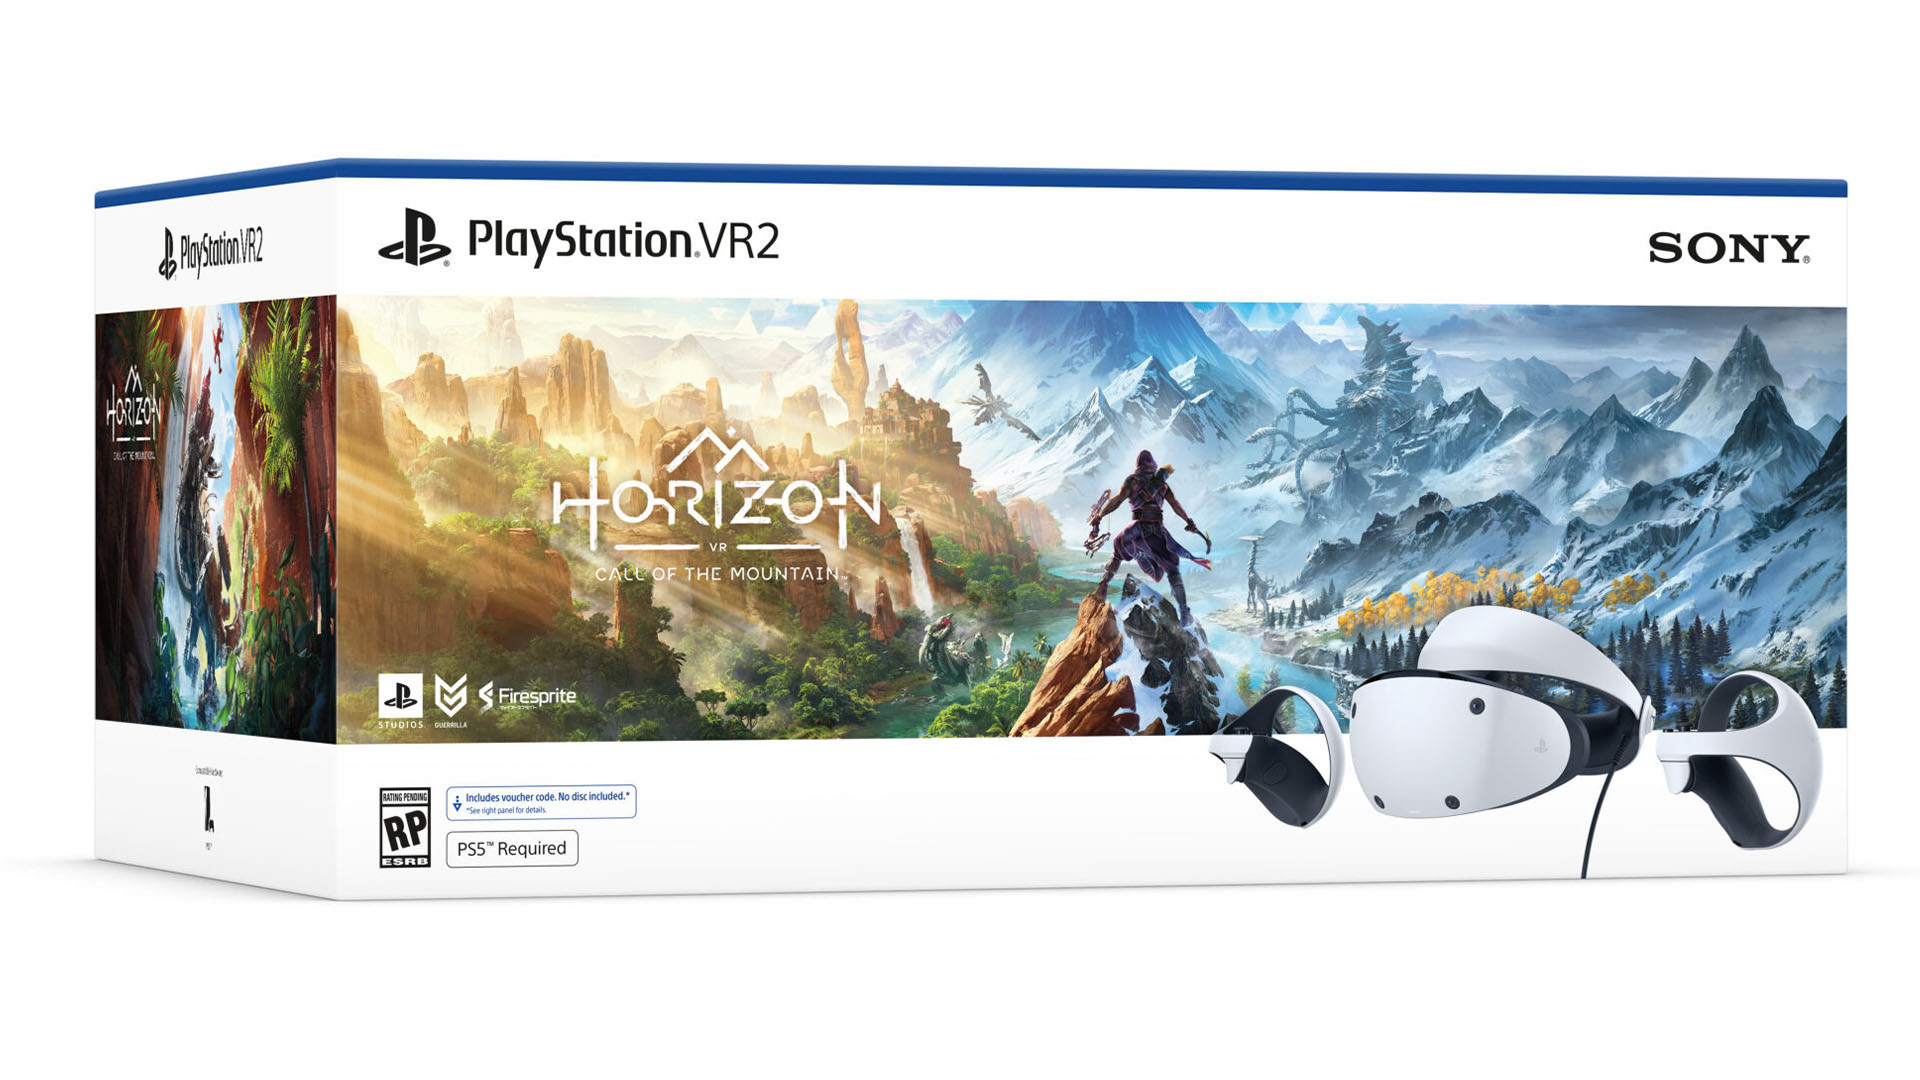 PlayStation VR2 (PSVR2) launch date, pricing, and bundles